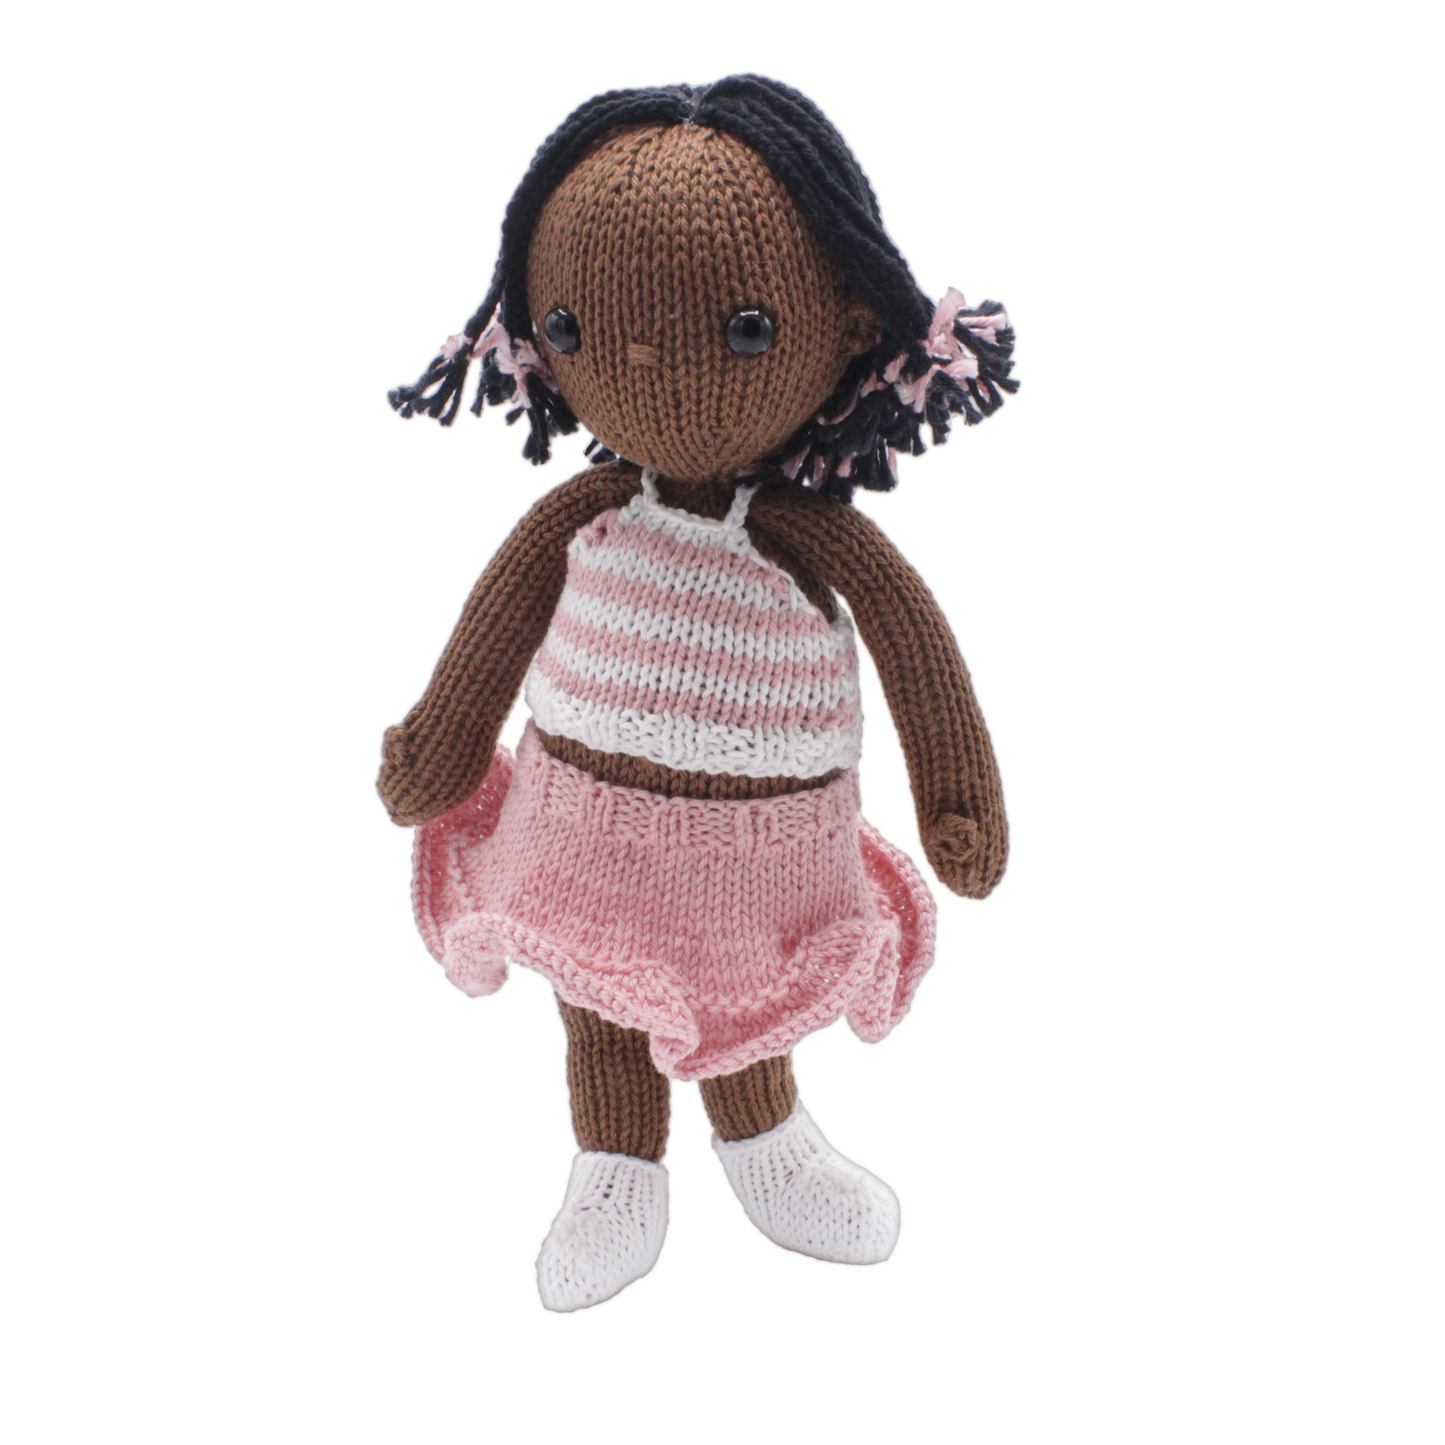 Meet May! A Little Girl Dressed in Pink - Dolly Knitting Kit